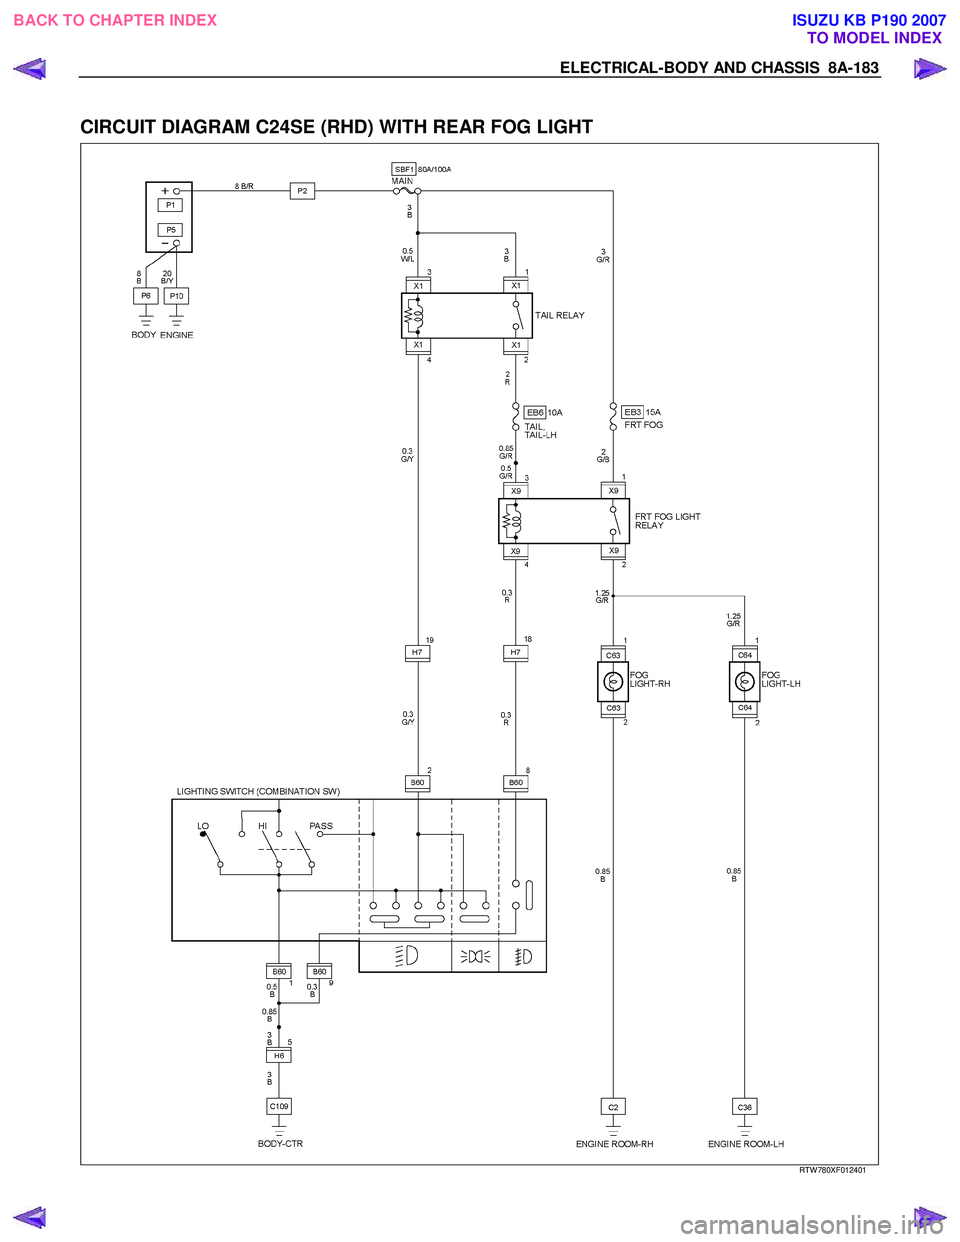 ISUZU KB P190 2007  Workshop Owners Manual ELECTRICAL-BODY AND CHASSIS  8A-183 
 
CIRCUIT DIAGRAM C24SE (RHD) WITH REAR FOG LIGHT 
  
  
RTW 780XF012401 
 
BACK TO CHAPTER INDEX
TO MODEL INDEXISUZU KB P190 2007 